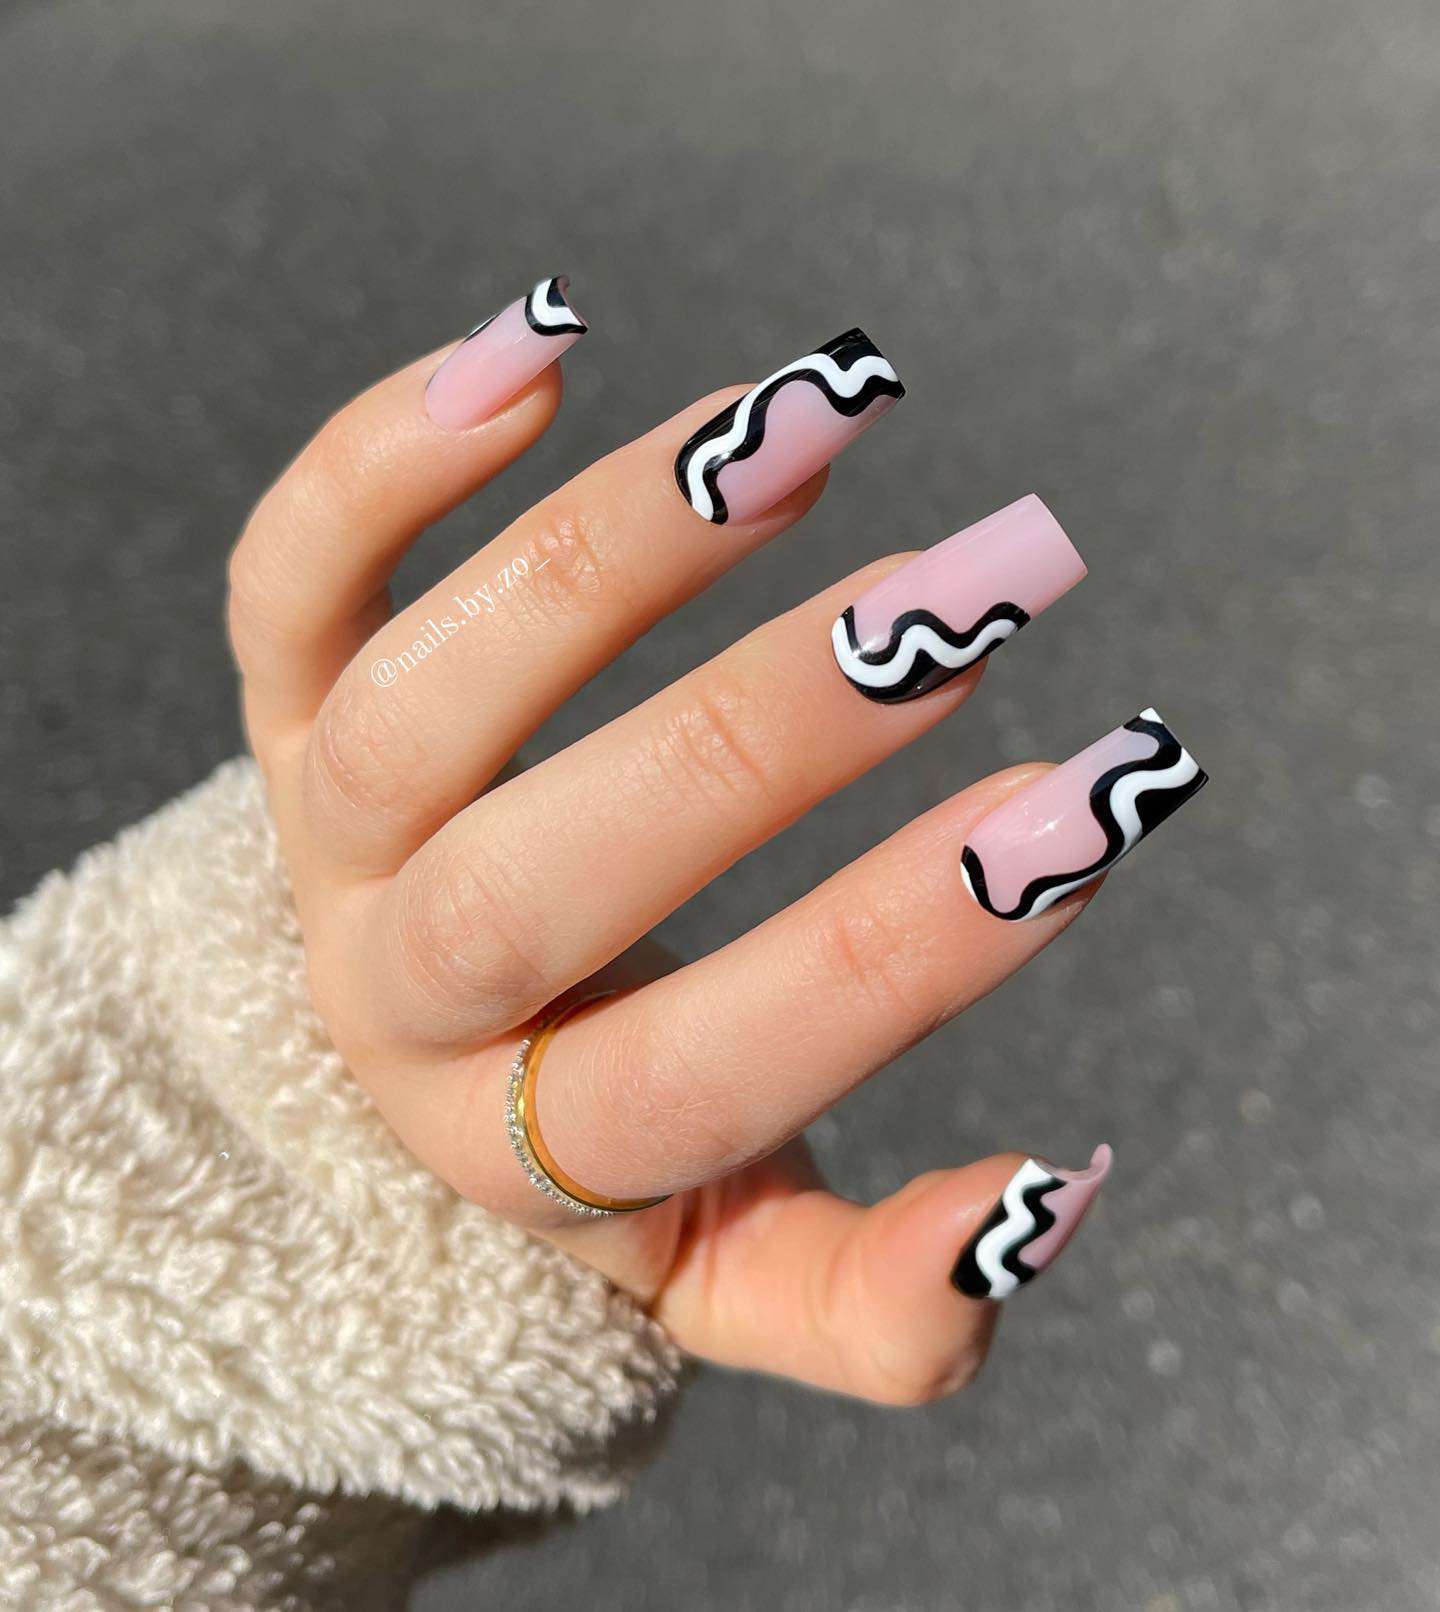 35 Nail Designs For 2022 You’ll Want To Try Immediately images 19